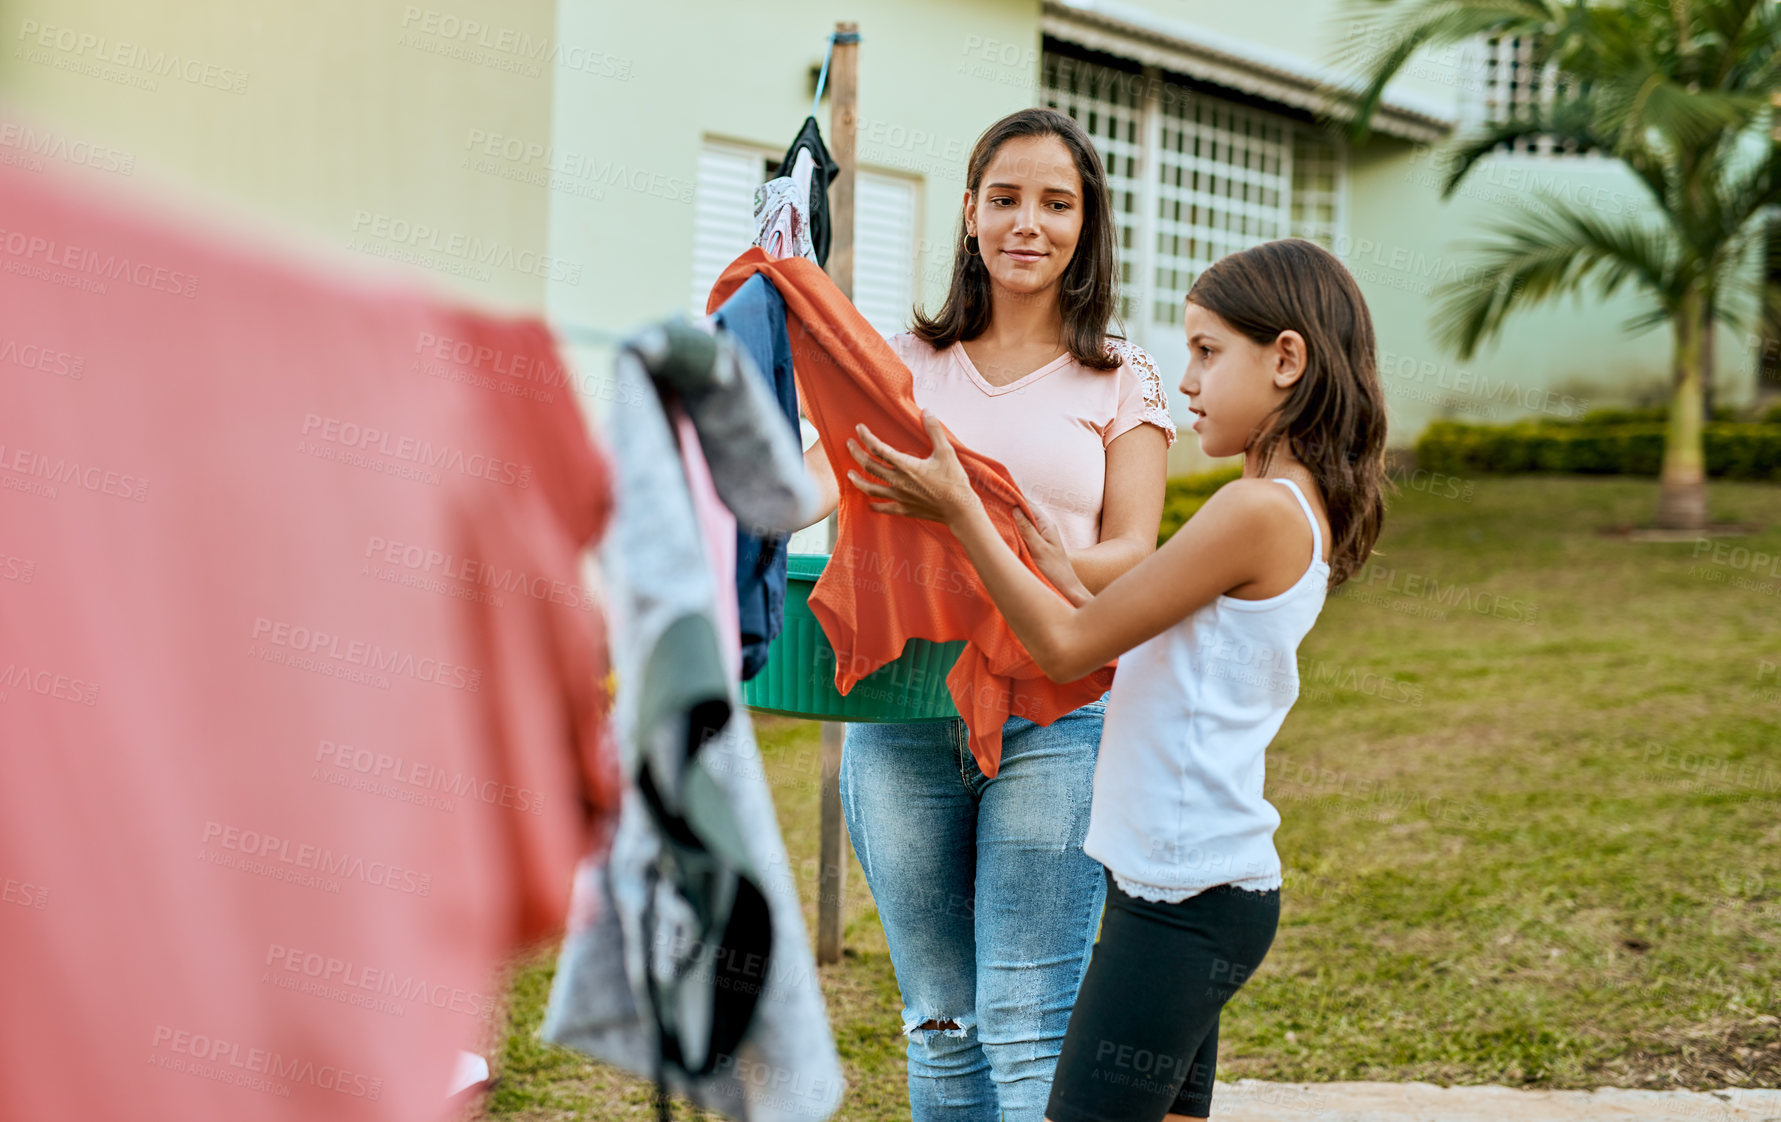 Buy stock photo Shot of a mother and daughter hanging up laundry together outside